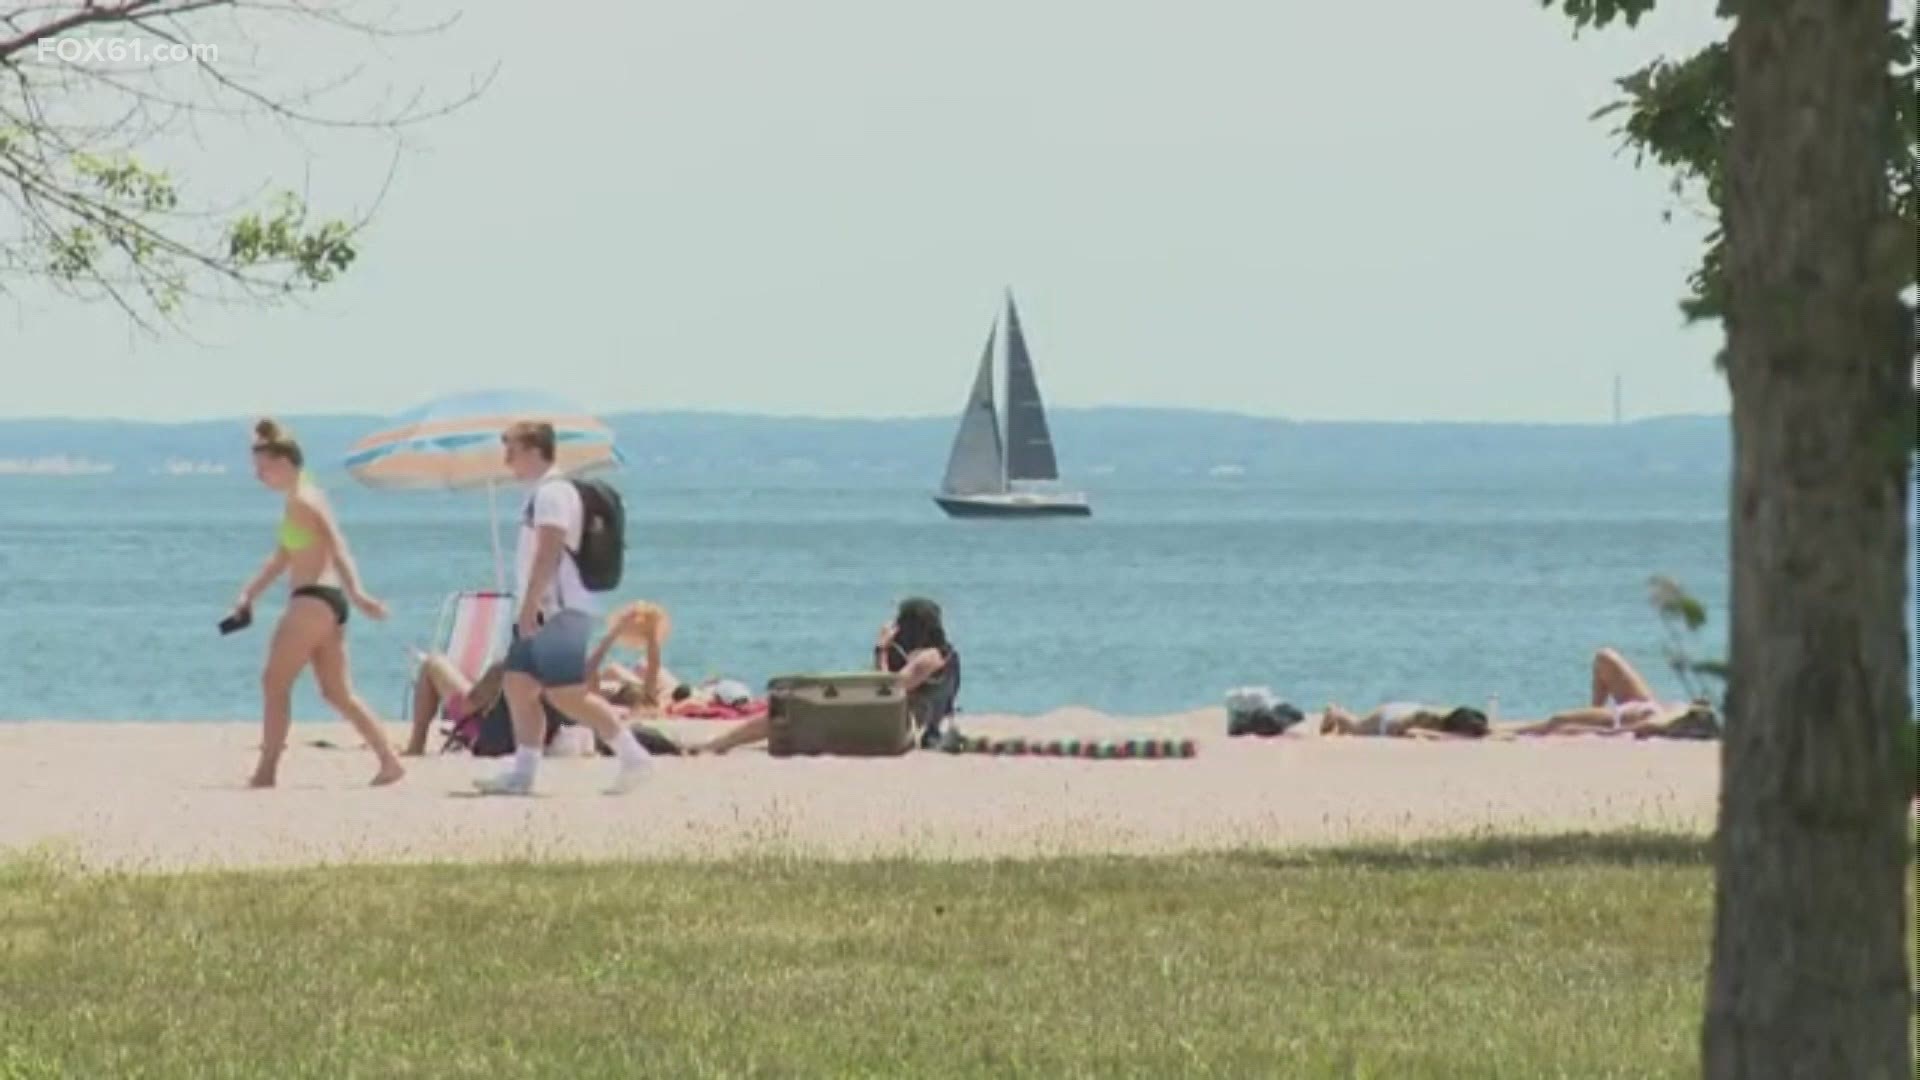 Officials say that within the next year, 45% of the state park workers will either retire or be eligible to retire.